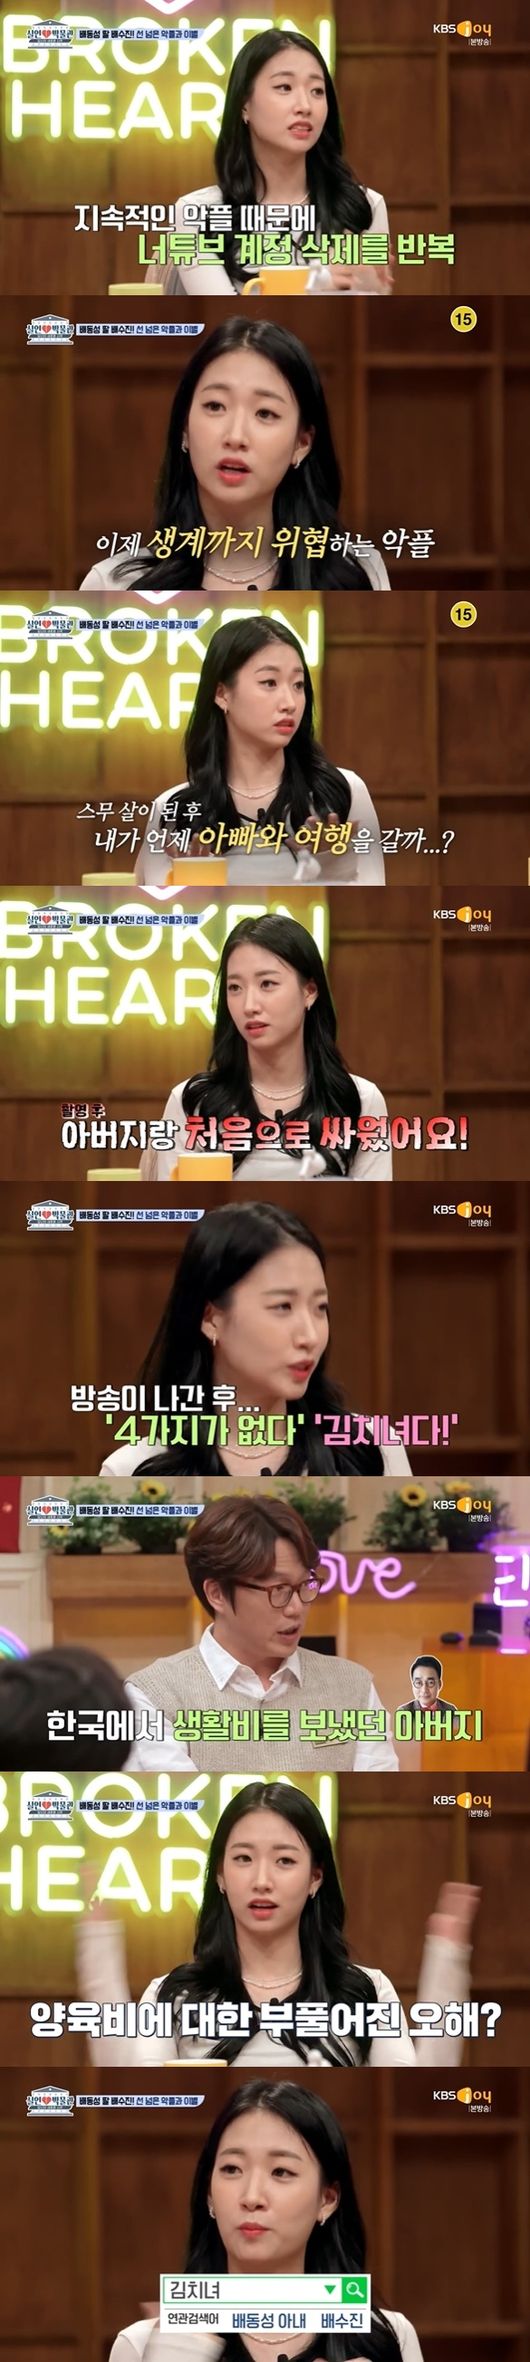 YouTuber Bae Soo-jin reveals the hardships because of FlamingOn the afternoon of the 29th, KBS Joy entertainment Natural History Museum, London featured Bae Soo-jin, a daughter of comedian Bae Dong-sung and a YouTuber Natalie.The performer who declared war with numerous Flaming attacks was Bae Soo-jin, I am not an entertainer, but Flaming runs, and MC Sung Si-kyung said, Flaming is me.I am a senior, so be comfortable. I will give you a lot of counseling. Bae Soo-jin said, There is Flaming that  I live easily with Father money  and  Why do you live so? He said.I deleted my YouTube channel twice because of Flaming, but it was only Flaming; it was so hard to eat and live, he said.The starting point for Flaming was the program for Father and Traveller.I was 20 years old at the time, and I thought it was a good opportunity, but the broadcast was a pro that made me feel better with Father.Originally, I was on good terms with Father, but after filming, I fought with Father for the first time; the broadcast started Flaming.The broadcast went out and said, There is no cheapness and kimchi girl.I lived in the United States, but Father said through the broadcast that he had spent his living expenses in Korea. There was a swelling misunderstanding about child support.Bae Soo-jin said, After that, I asked my parents, What is the amount? Is it right?At that time, when I hit kimchi girl, my mother and I came out.  I was the best with Father among the three brothers and sisters. I was sorry for my daughter. Until recently, I talked to Father a lot because of Flaming.When Flaming ran, Father said, It will be easy to go over a little, just bear it.MCs asked for action on Flaming, and Bae Soo-jin said: Its not easy either.As a single mother, she is in charge of raising son, and she can not afford the expensive lawyers expenses. Its not a small cost, but I decided to use all of my money, Sung Si-kyung said. I have to catch a criminal who swears at me with a lawyer.How bad and bad this is, and how it drives the person to suicide. There are middle school students and teachers in Flaminger, and many things happen in anonymity. Bae Soo-jin recently appeared in MBN entertainment Doll Singles to find a new relationship, but Choi Jun-ho and pink air currents were formed, but the final couple failed.Bae Soo-jin said, I was cursed by that and recently went on the air and got more cursed.I had a tooth complex because of my wisdom tooth on the air, and I covered my mouth. I smelled of alcohol and covered my mouth.And Ive been living in a year, and I became marriage with premarital pregnancy.I knew it, I am proud of Divorce, I am so divorce, and so on. Of course, it is not a pride, but it is not a sin to divide, but when I run my son and family Flaming, I will go crazy, said Bae Soo-jin. I am raising my 4-year-old son alone.I was upset that my son was being cursed. I couldnt stand it because I was swearing at him.When I cursed me, I said, I have to endure it. I can not stand this because I swear at my family. I do not know if Flaming is fun to write, but I would like you to refrain from Flaming, especially children and family related flamings.Sung Si-kyung added: Its a single mom who is eagerly working and trying to live; Flaming is a freedom of expression if its a proper line, but if you cross the line, it can hurt you too much.Natural History Museum, London broadcast screen capture